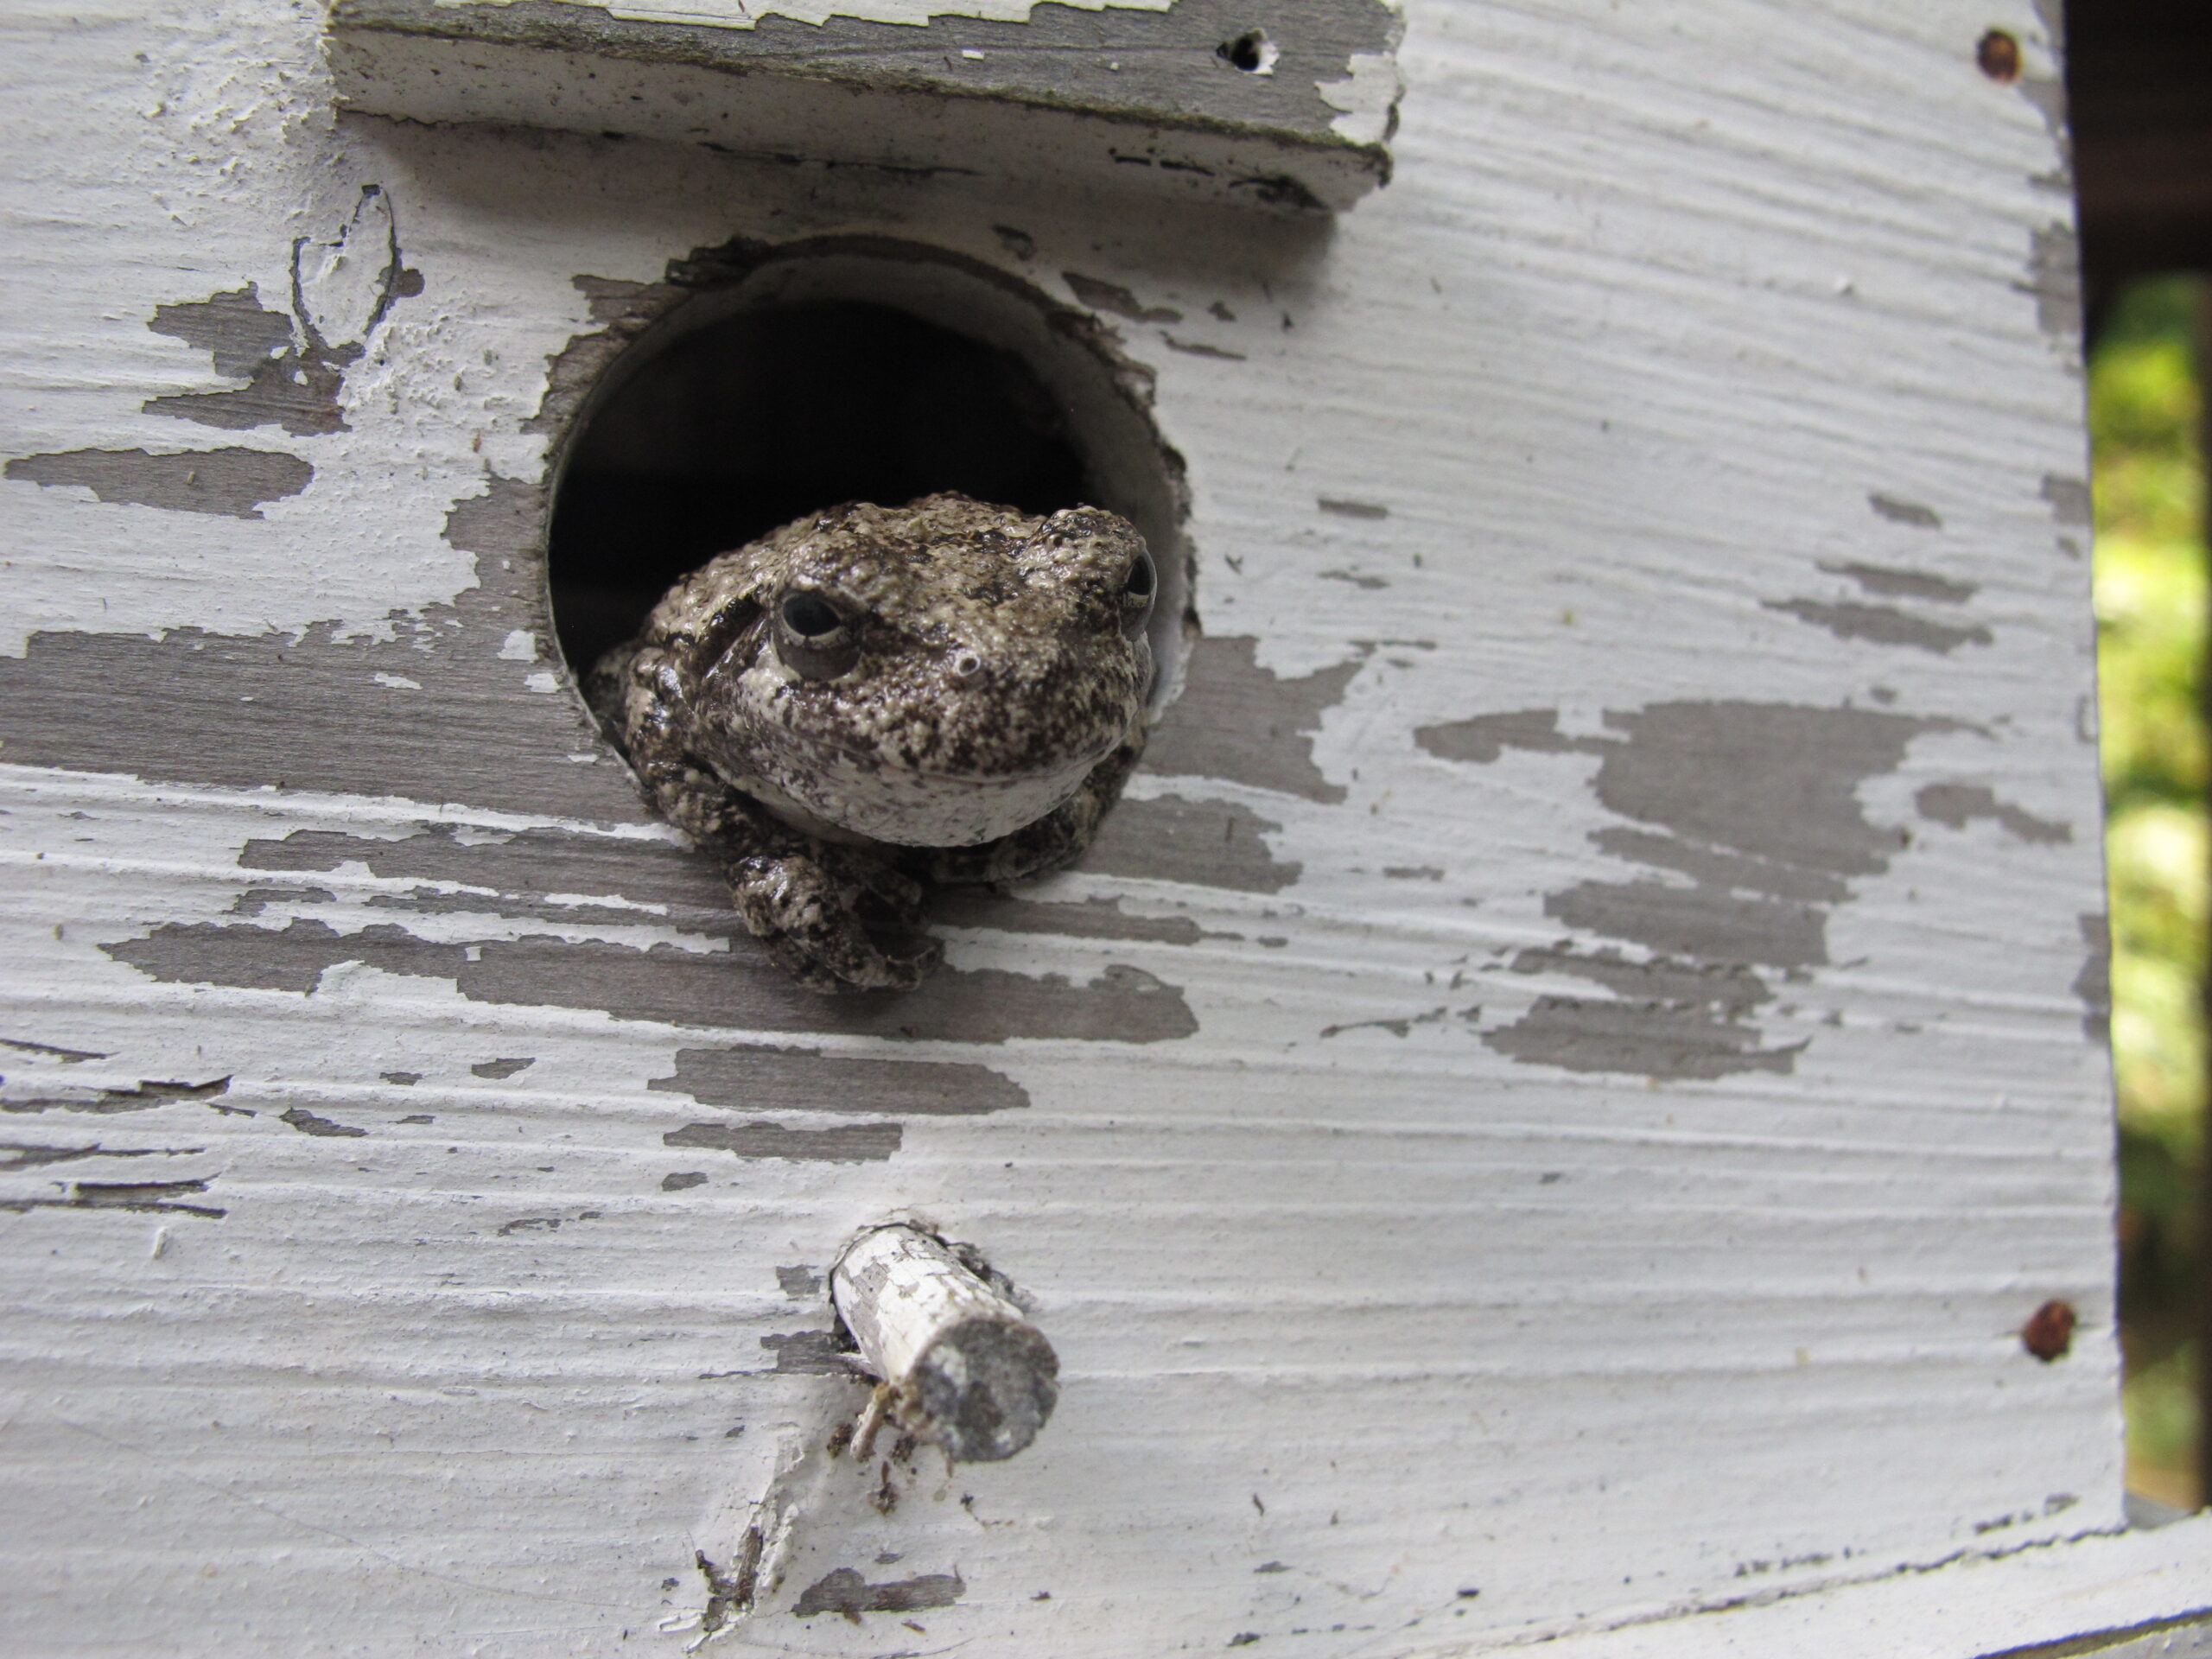 A frog poking its head out of a bird house